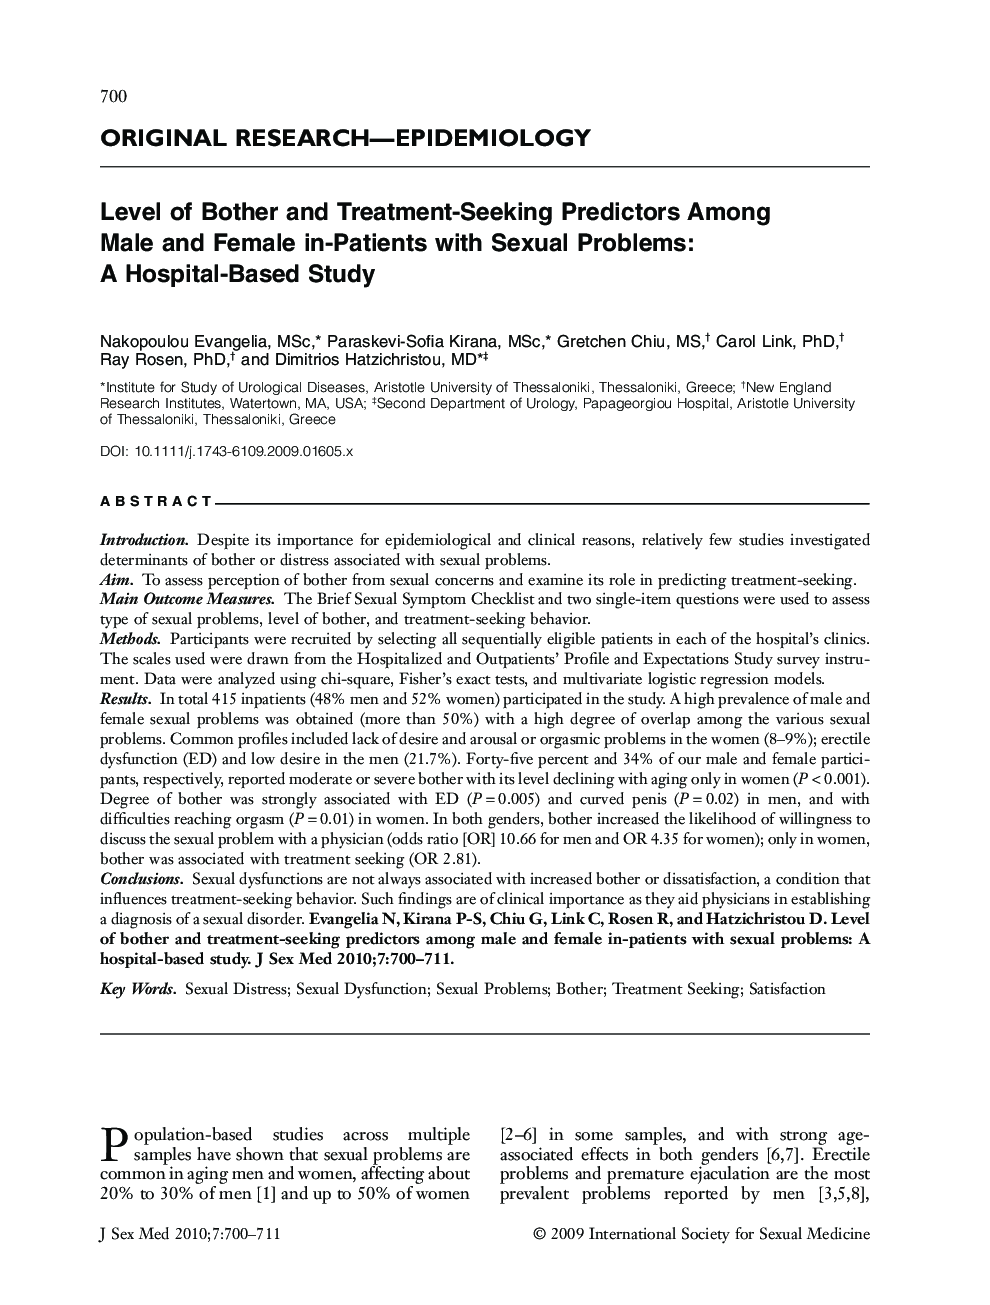 Level of Bother and Treatment-Seeking Predictors Among Male and Female in-Patients with Sexual Problems: A Hospital-Based Study